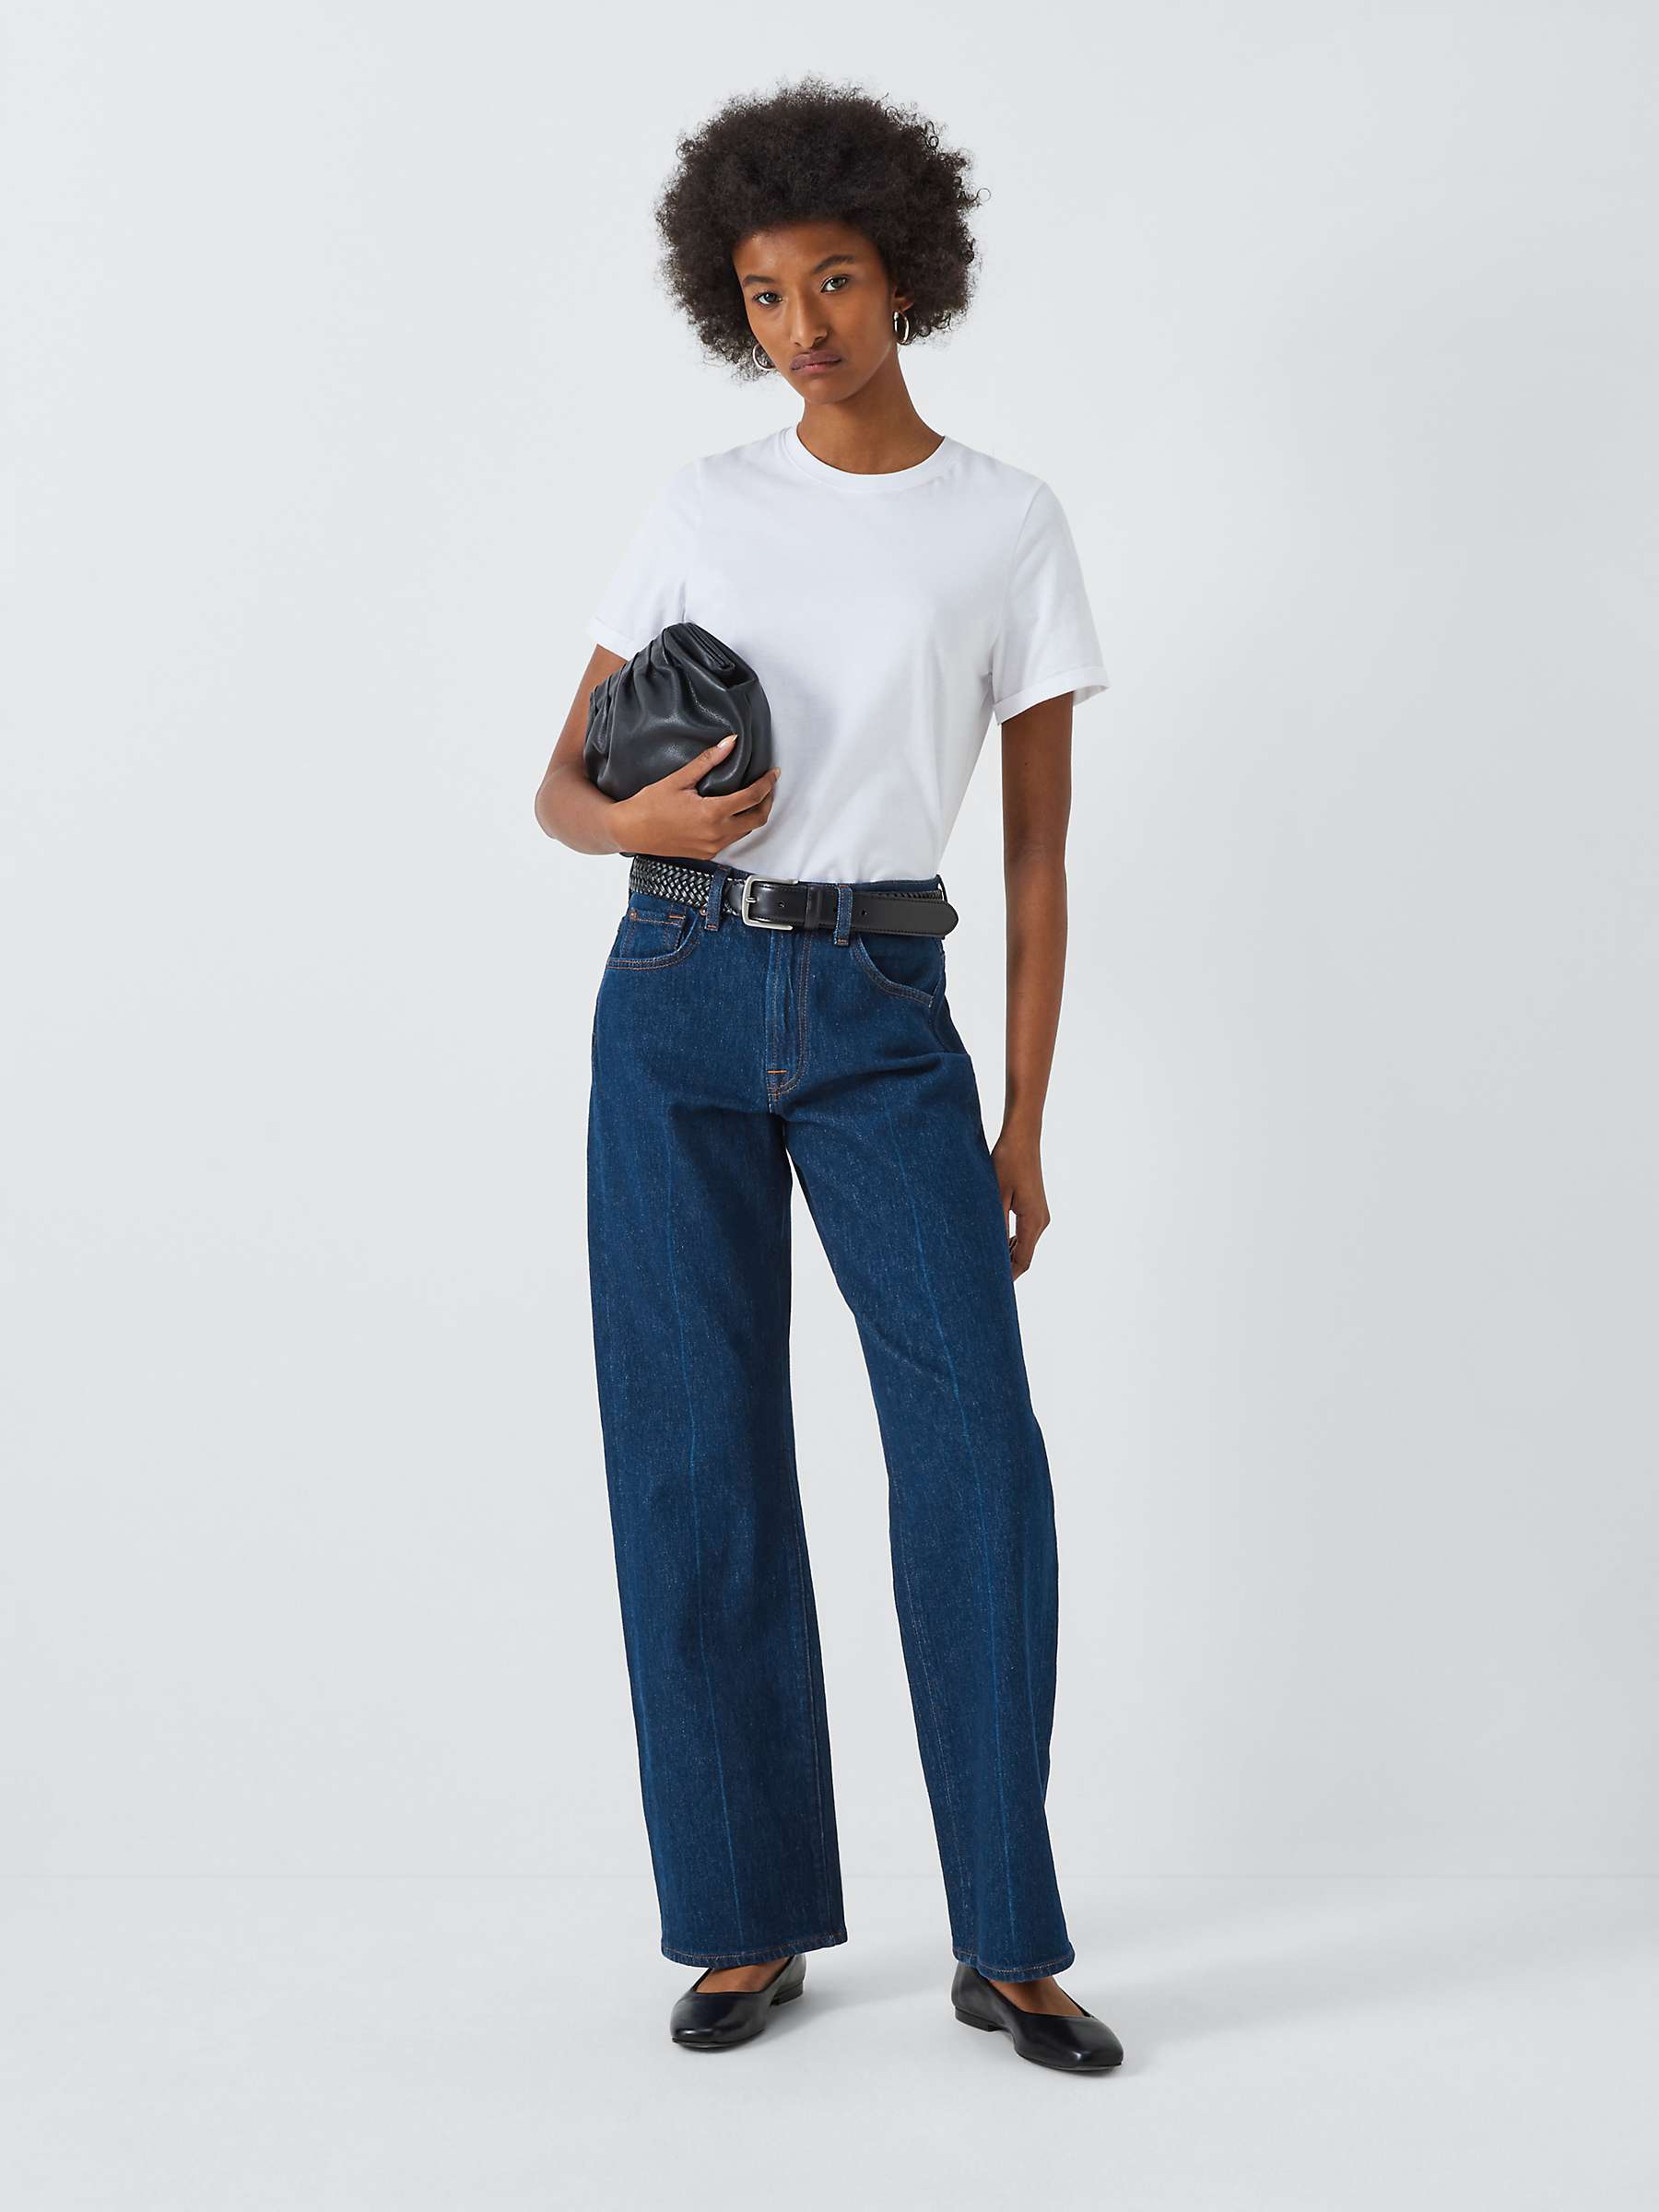 Buy 7 For All Mankind Lotta Luxe Vintage Flared Jeans, Dark Blue Online at johnlewis.com